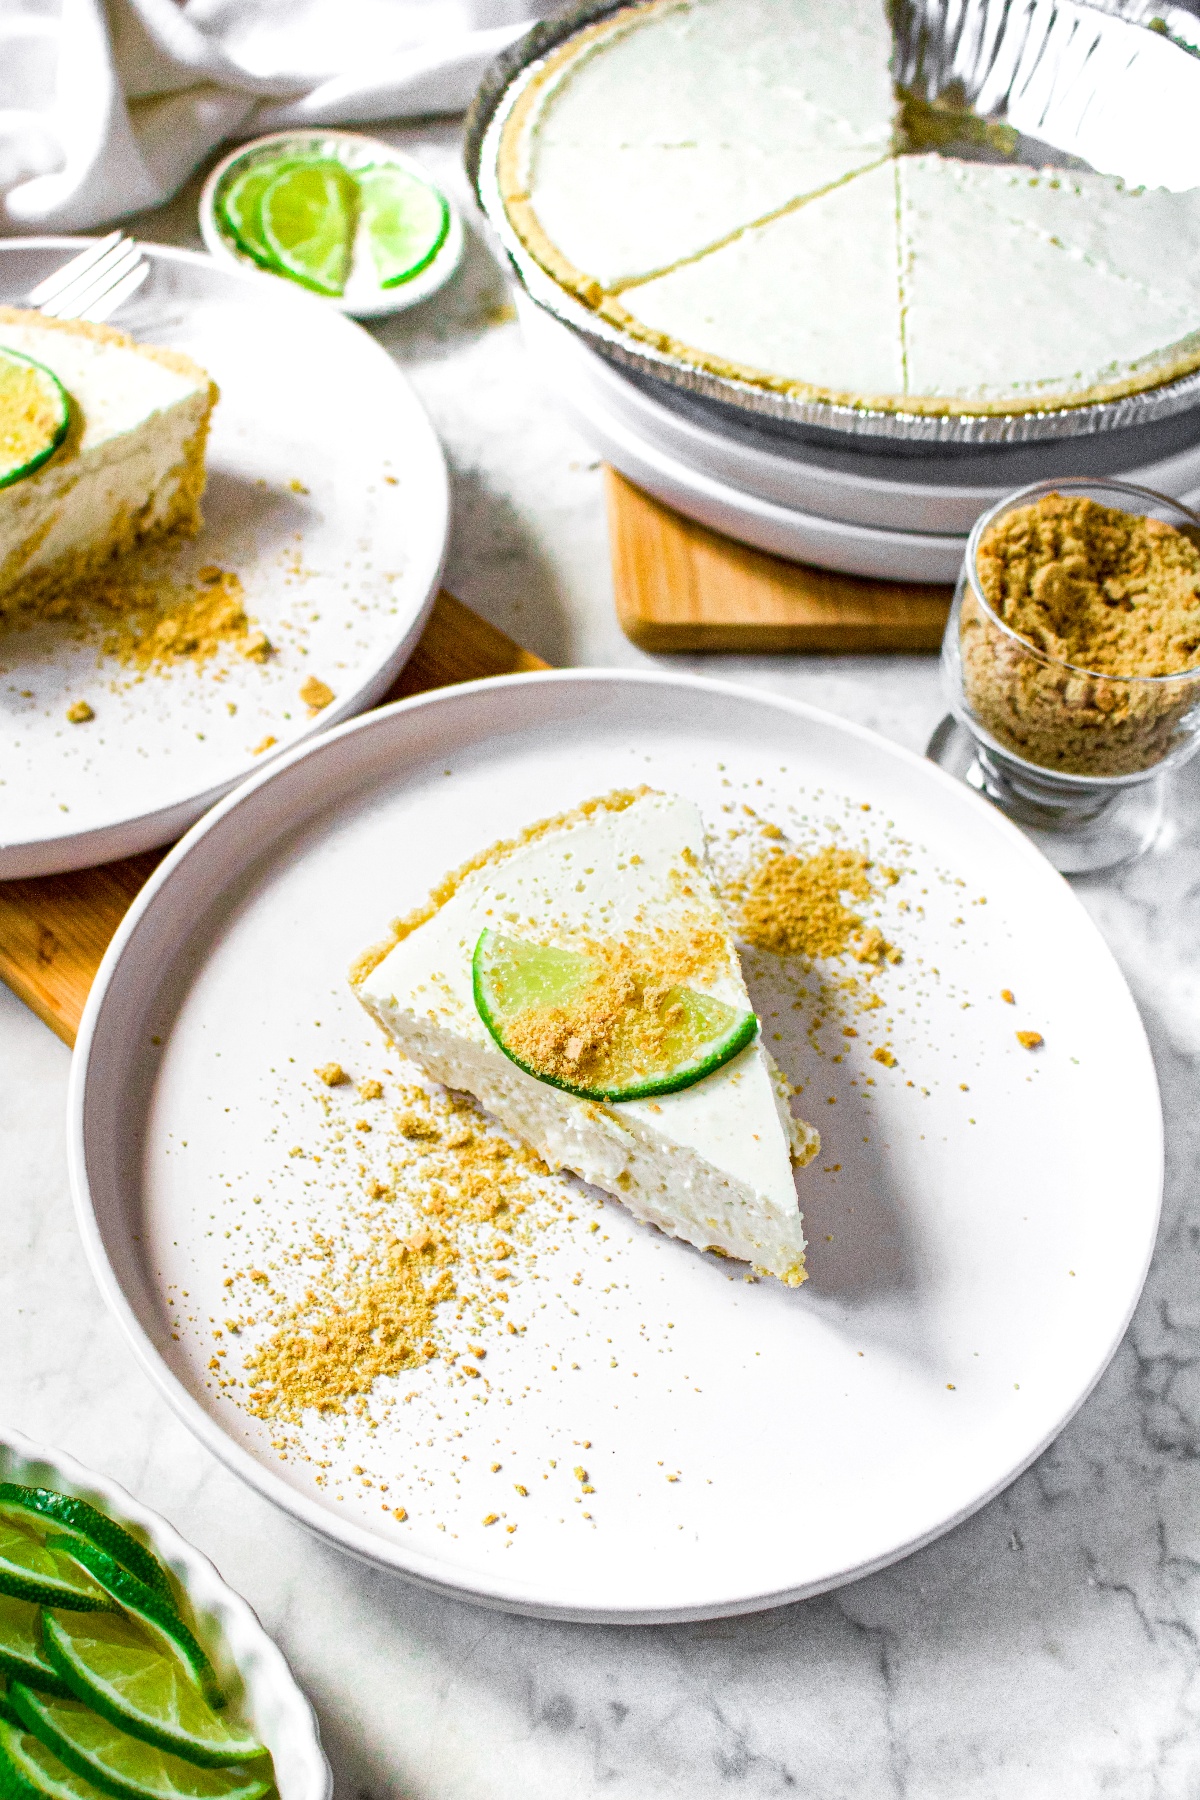 Overhead shot of a white round plate with a dairy free key lime pie slice on top. The pie is topped with a lime slice and graham cracker crumbs. There is another piece of pie in the background and a full pie also.